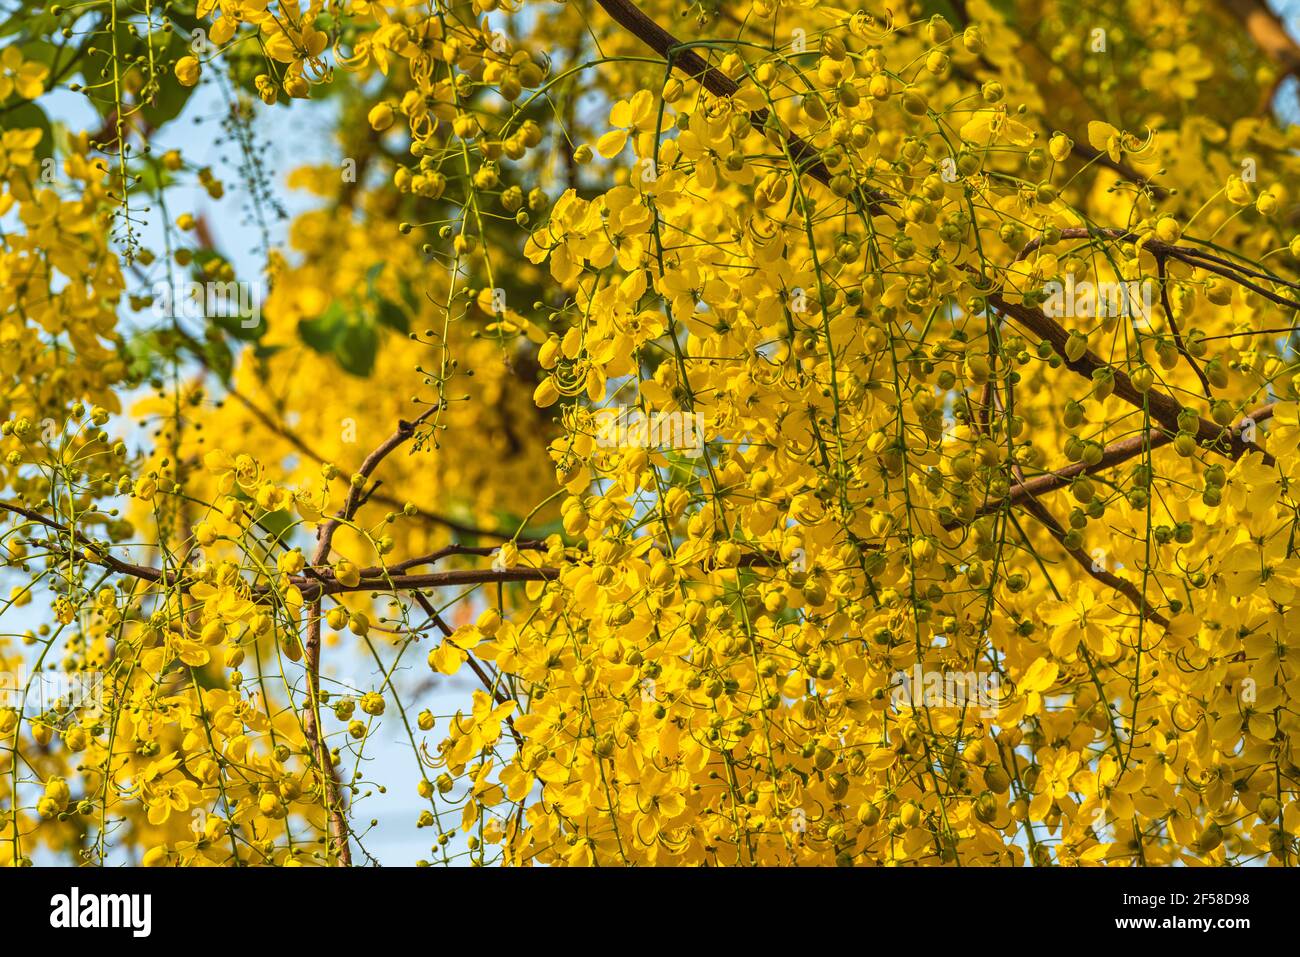 Beautiful yellow flowers in nature, close up Golden shower tree in nature, Golden shower tree is the National flower of Thailand. Stock Photo